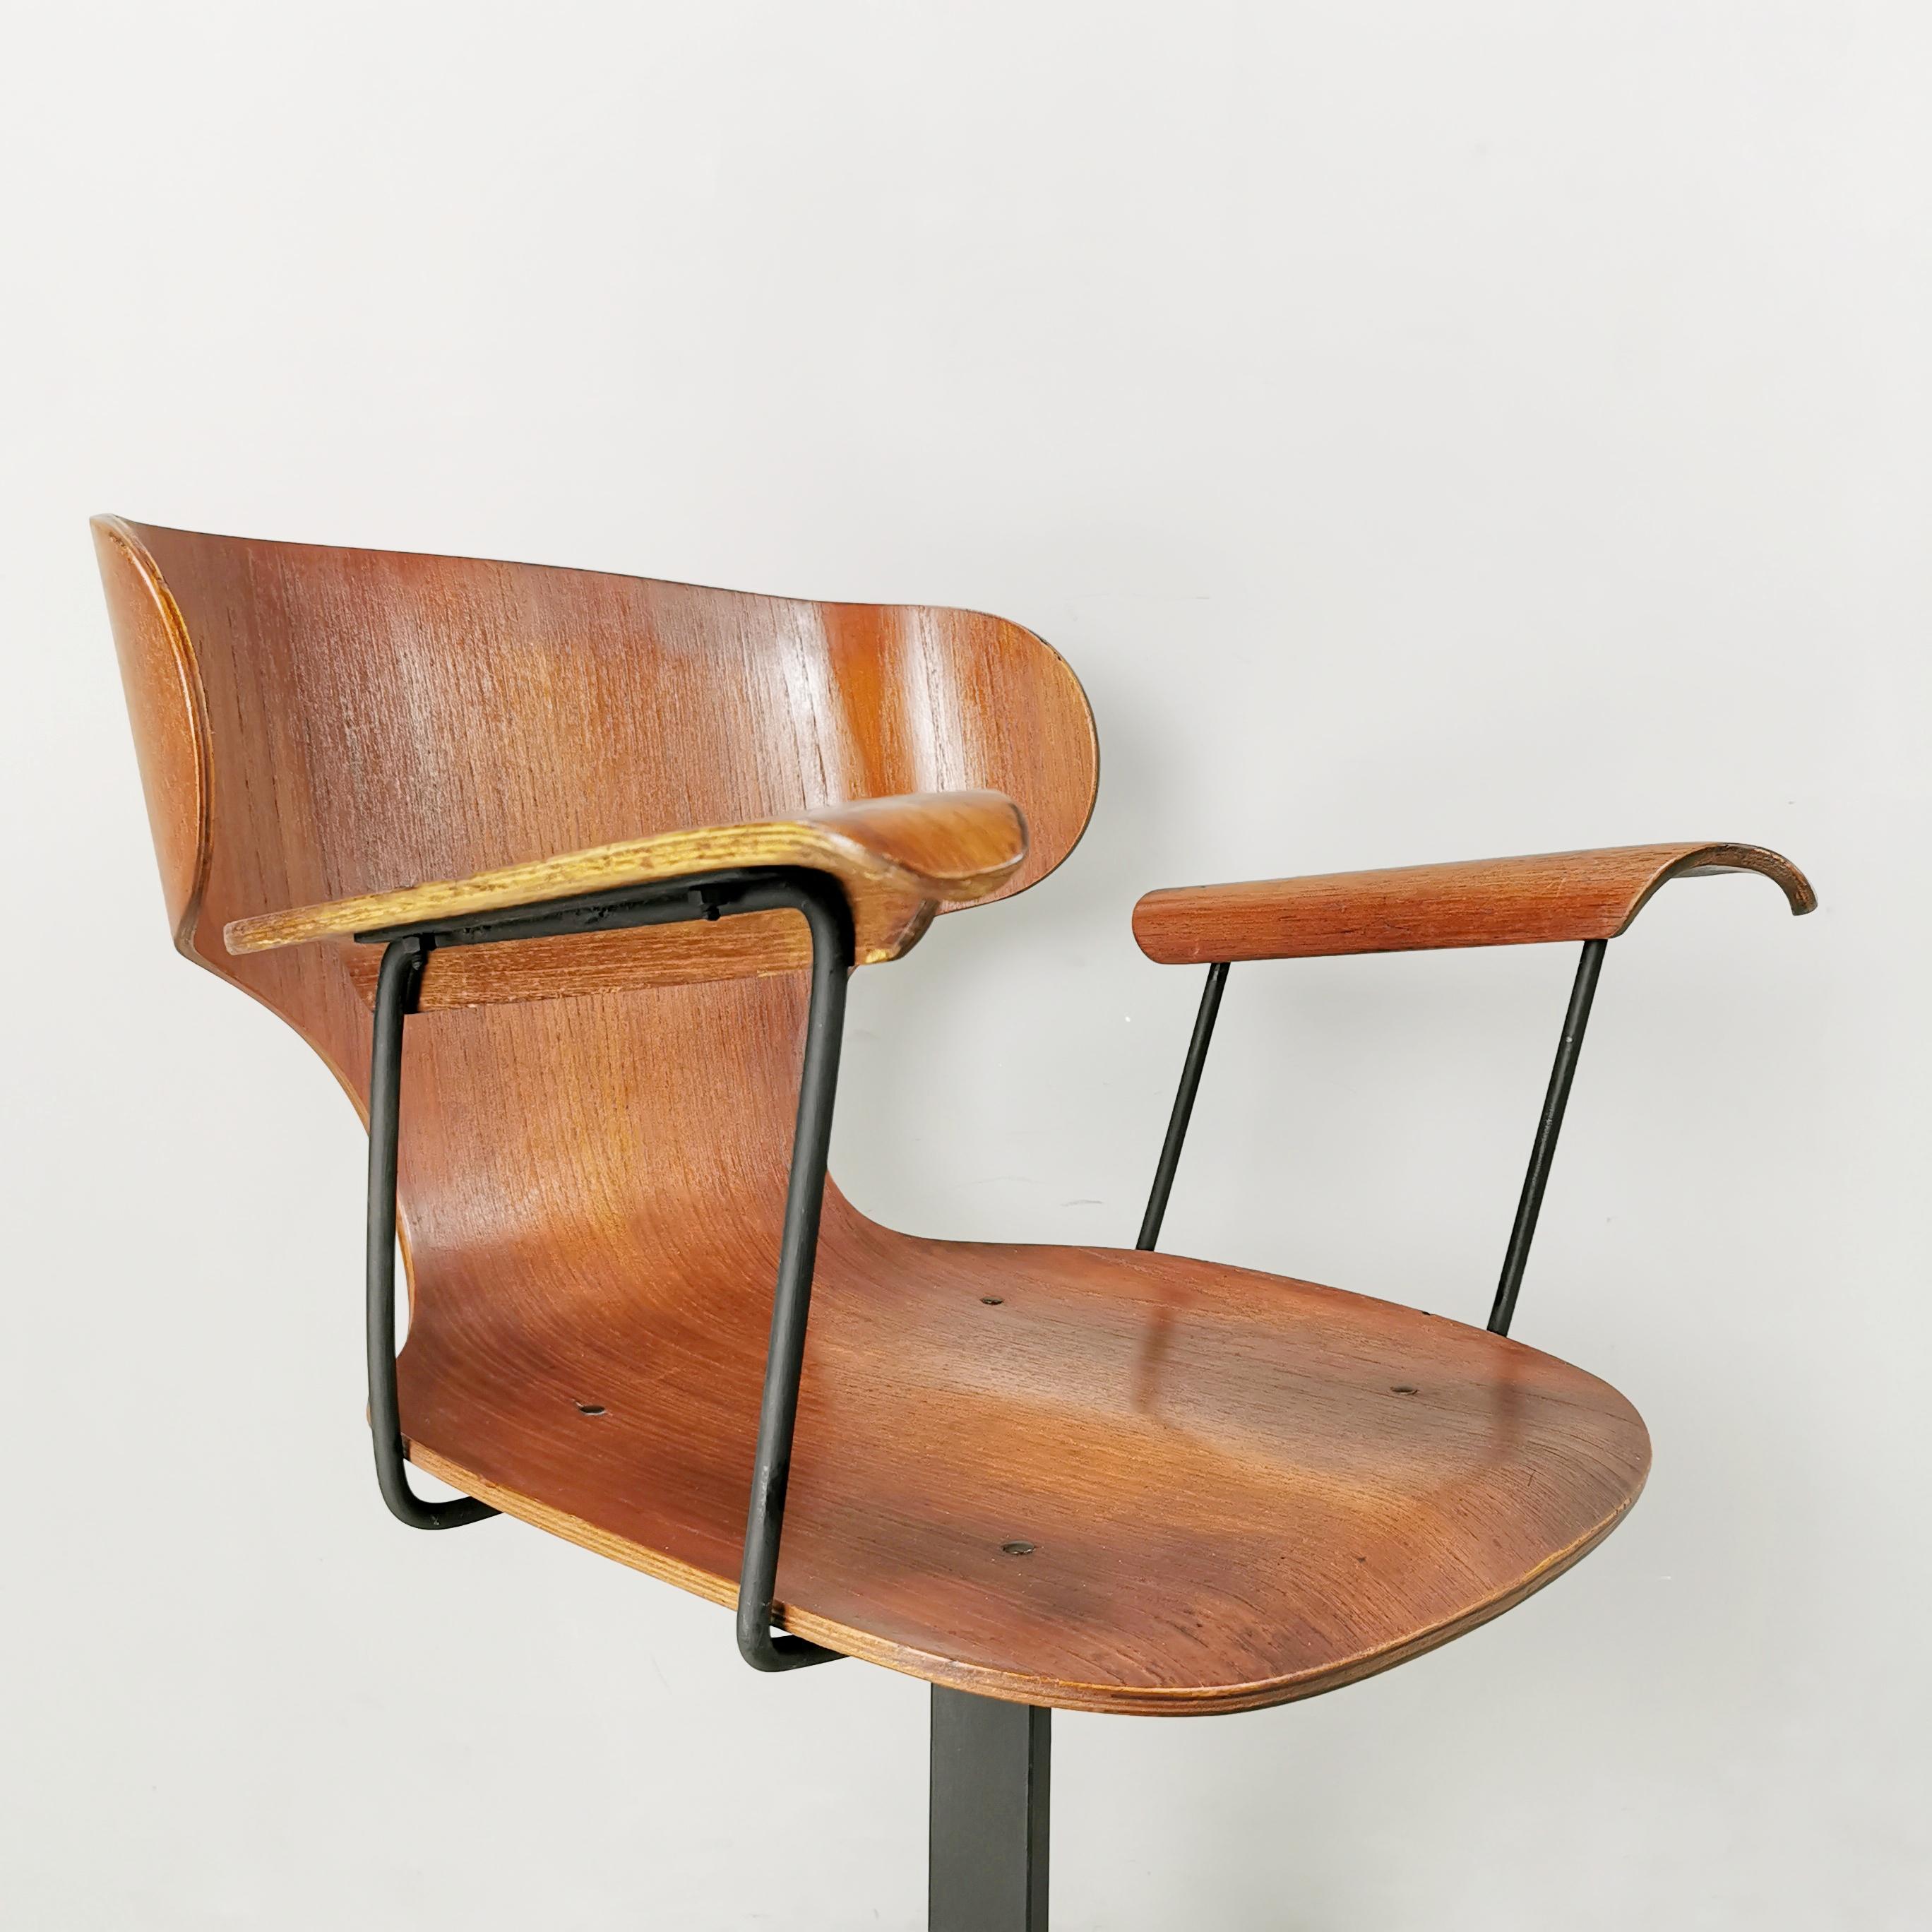 20th Century rare 50s/60s curved wooden office chair en vente